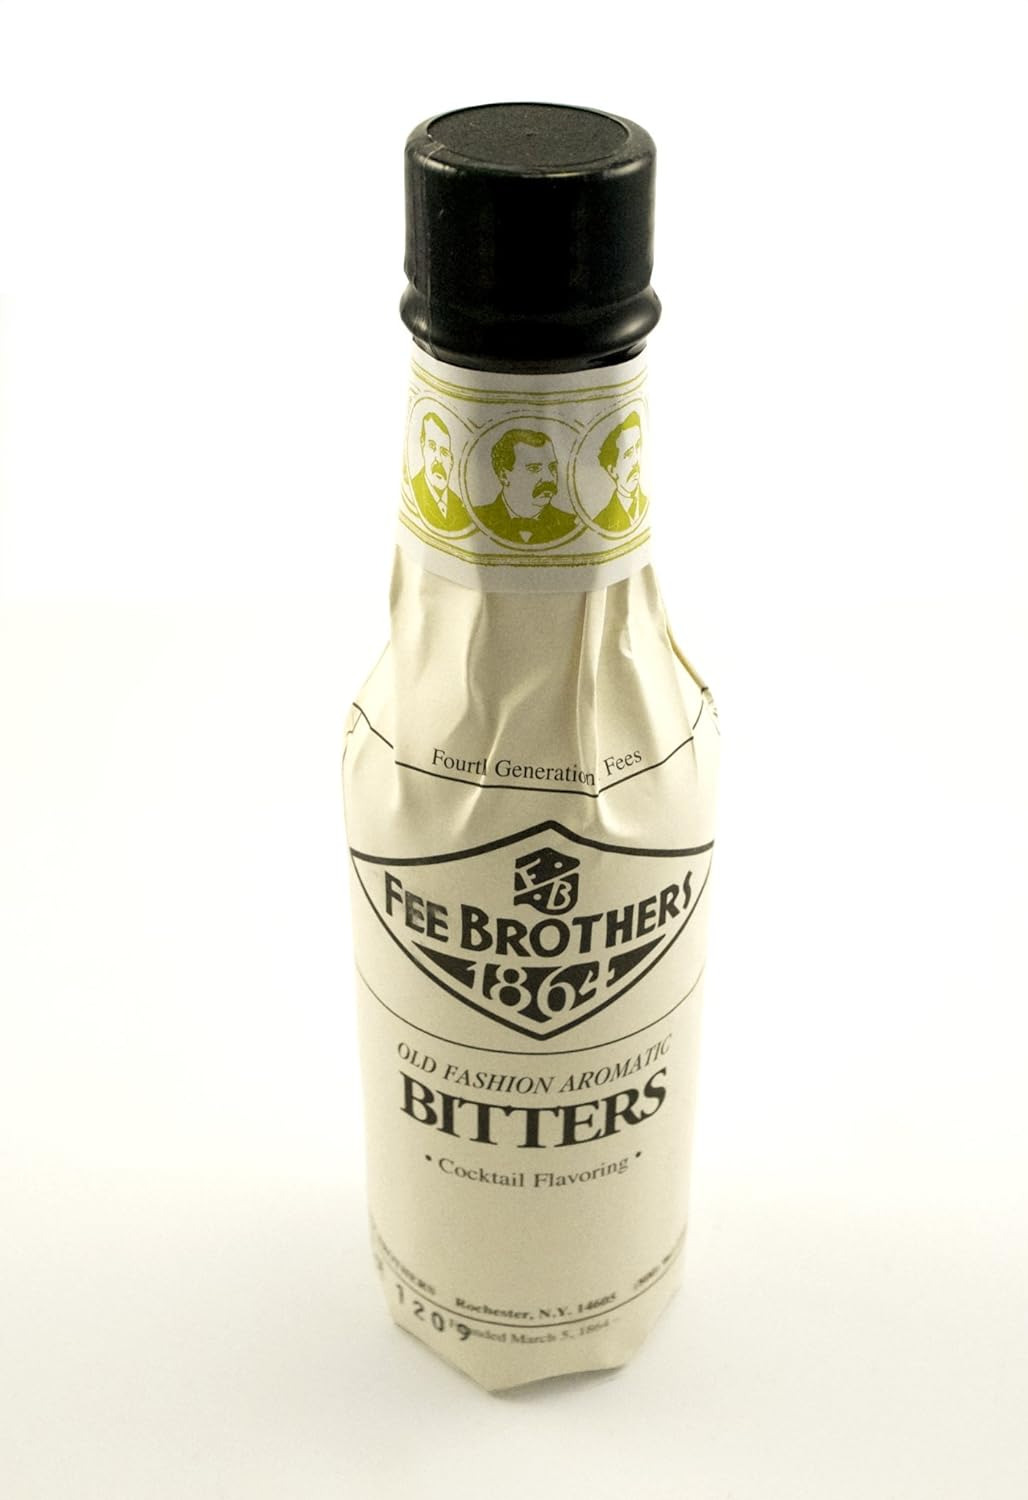 Old Fashion Aromatic Bitters 5Oz